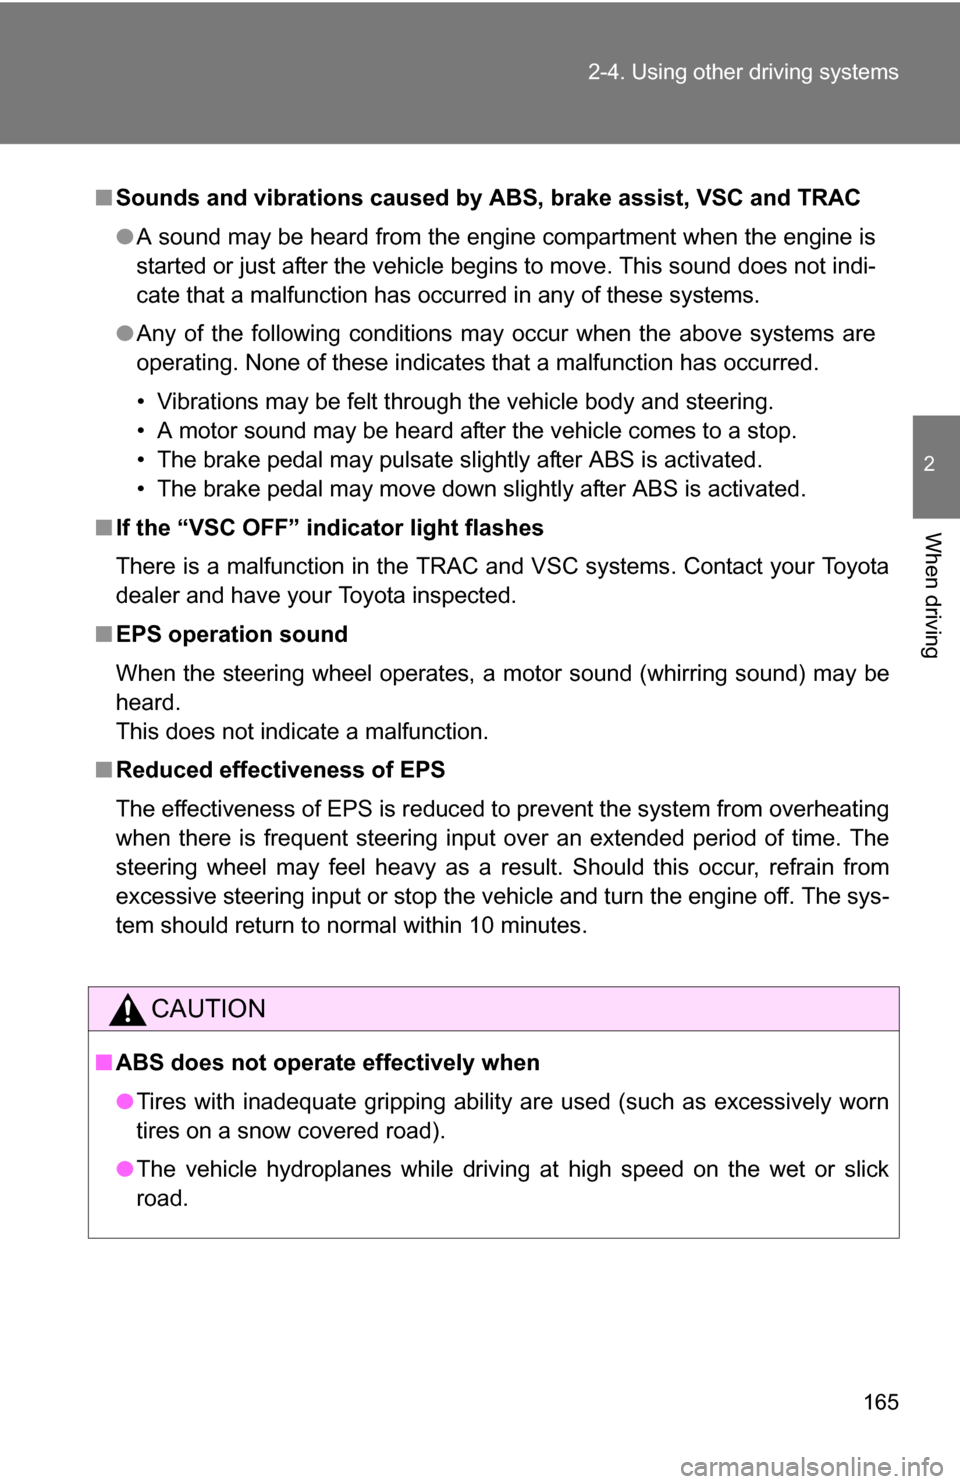 TOYOTA COROLLA 2010 10.G Owners Manual 165
2-4. Using other 
driving systems
2
When driving
■Sounds and vibrations caused  by ABS, brake assist, VSC and TRAC
● A sound may be heard from the engine compartment when the engine is
started